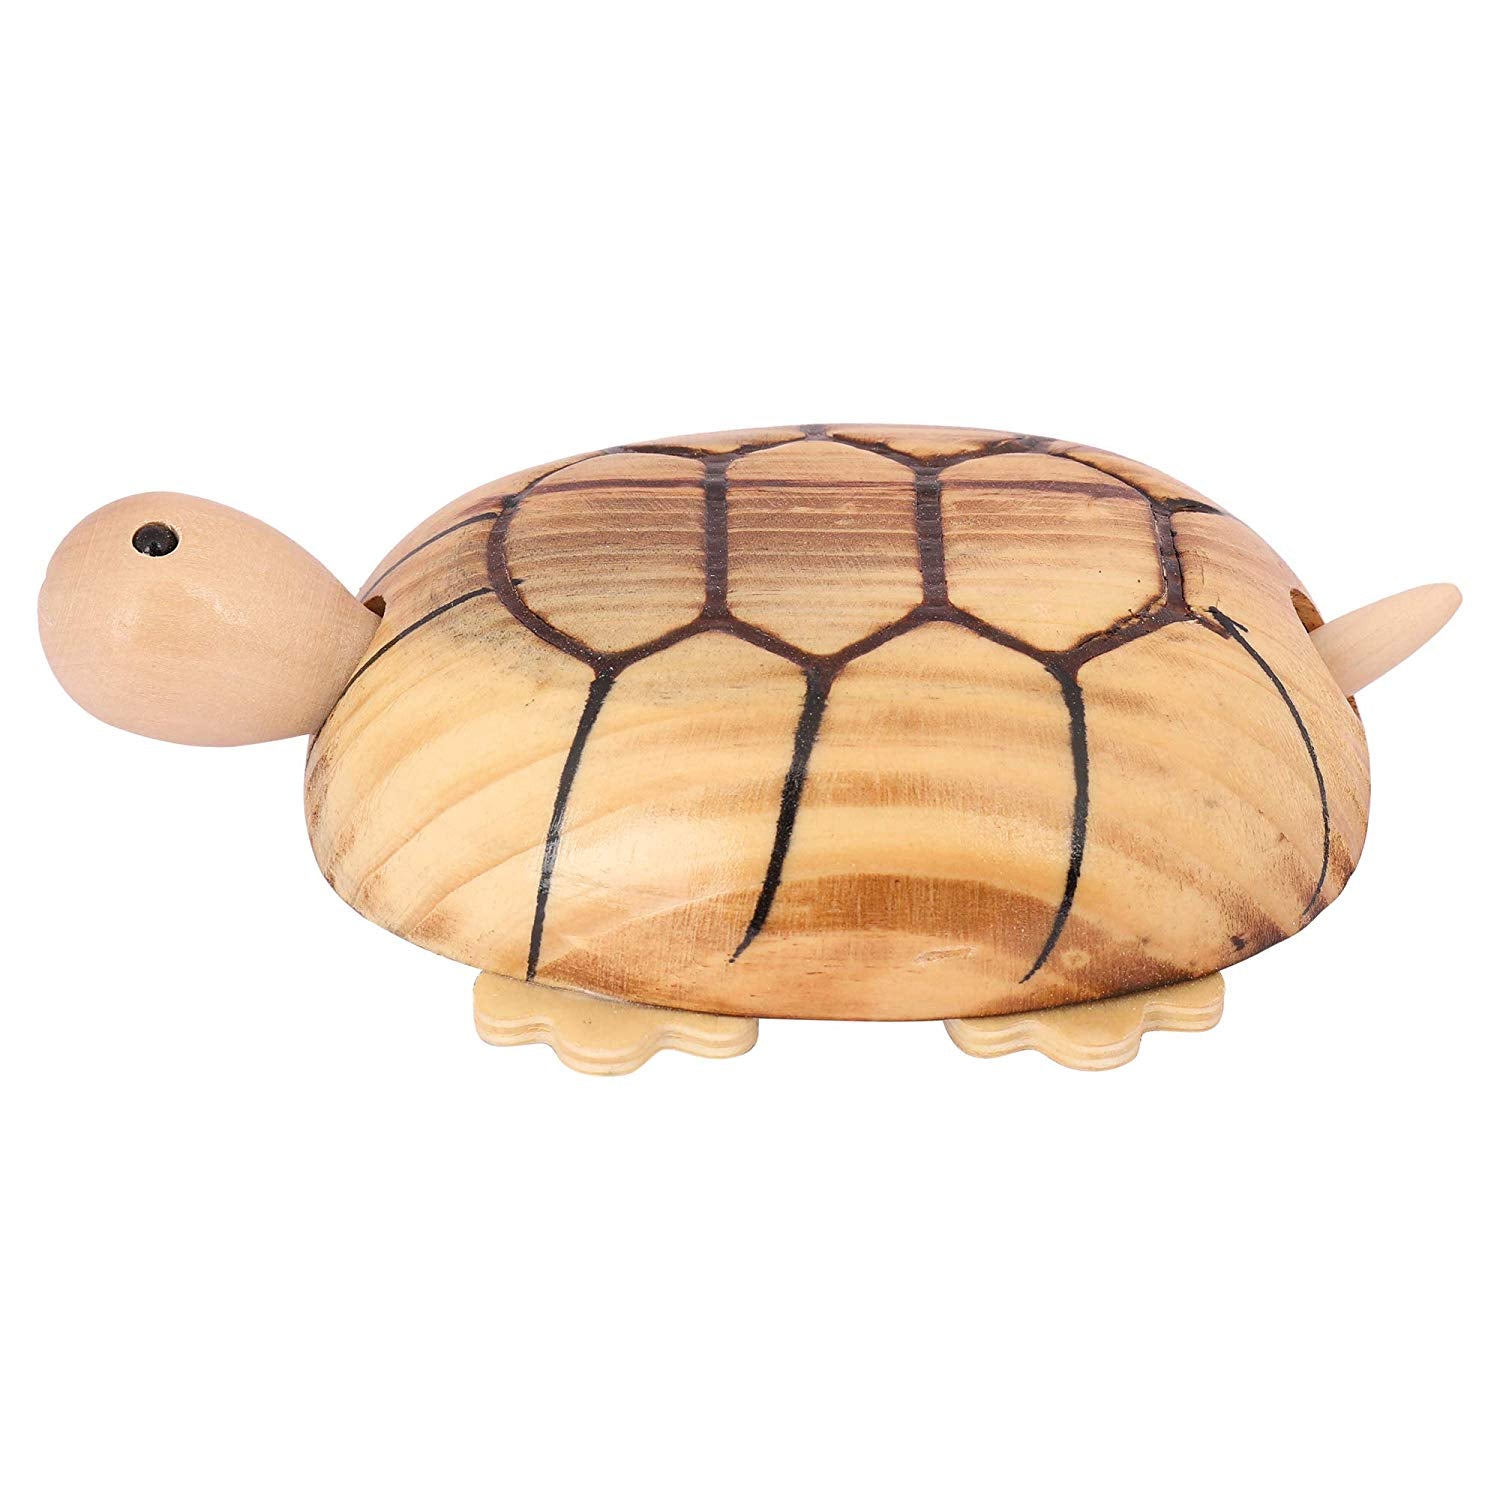 DAISYLIFE Natural and Eco-friendly Natural Wooden Turtle / Tortoise with movable wheels for kids below 2 years